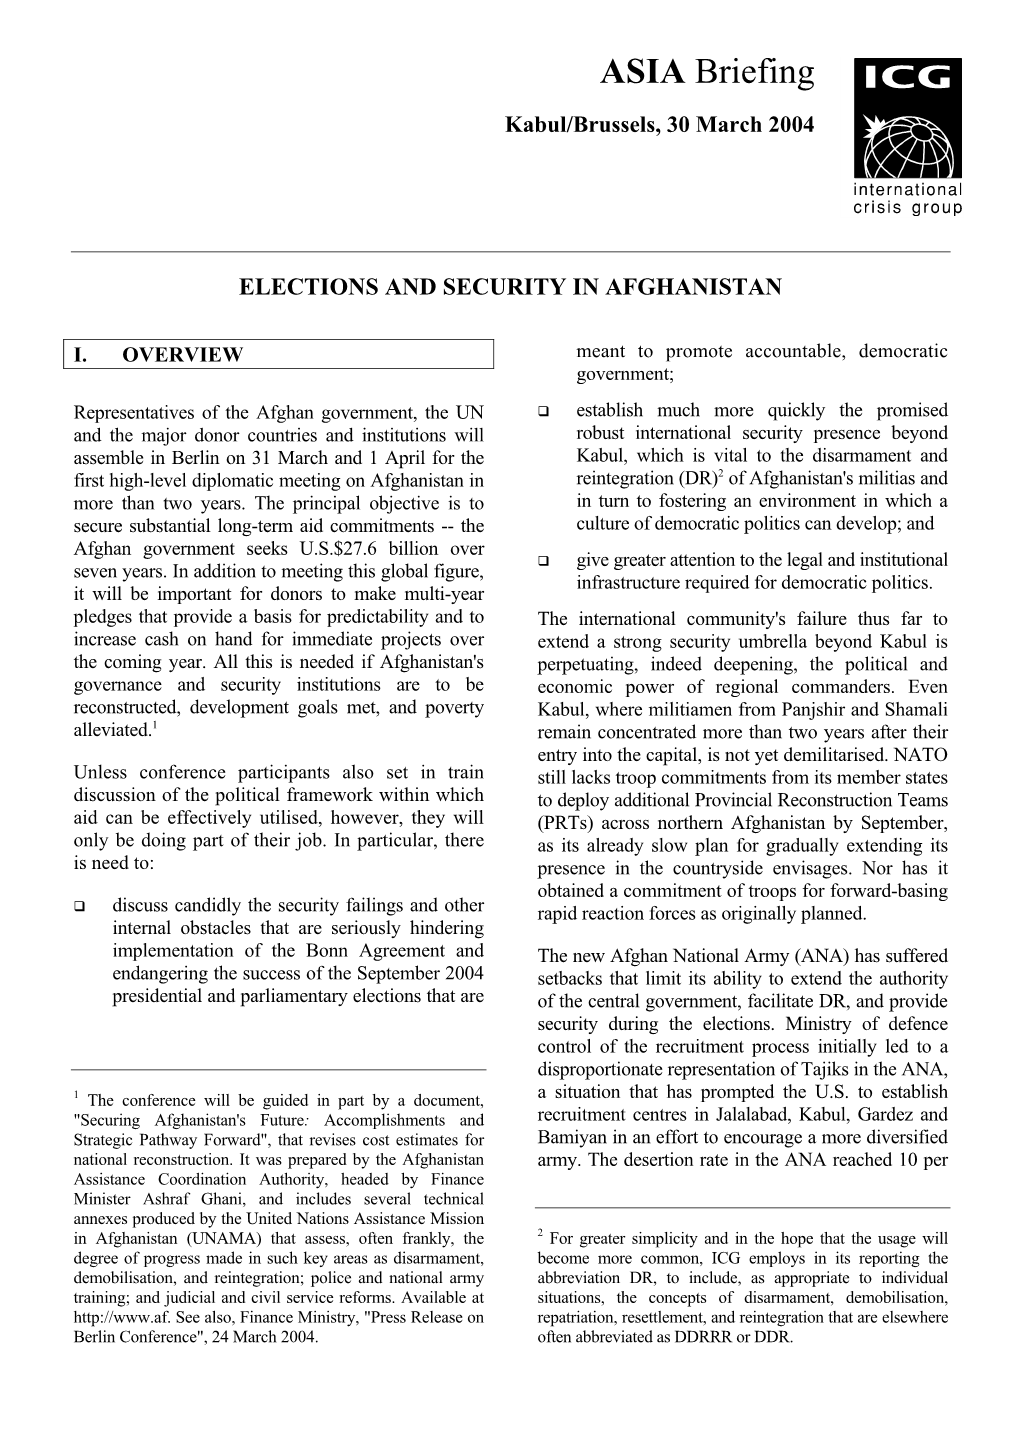 Asia Briefing, Nr. 31: Elections and Security in Afghanistan